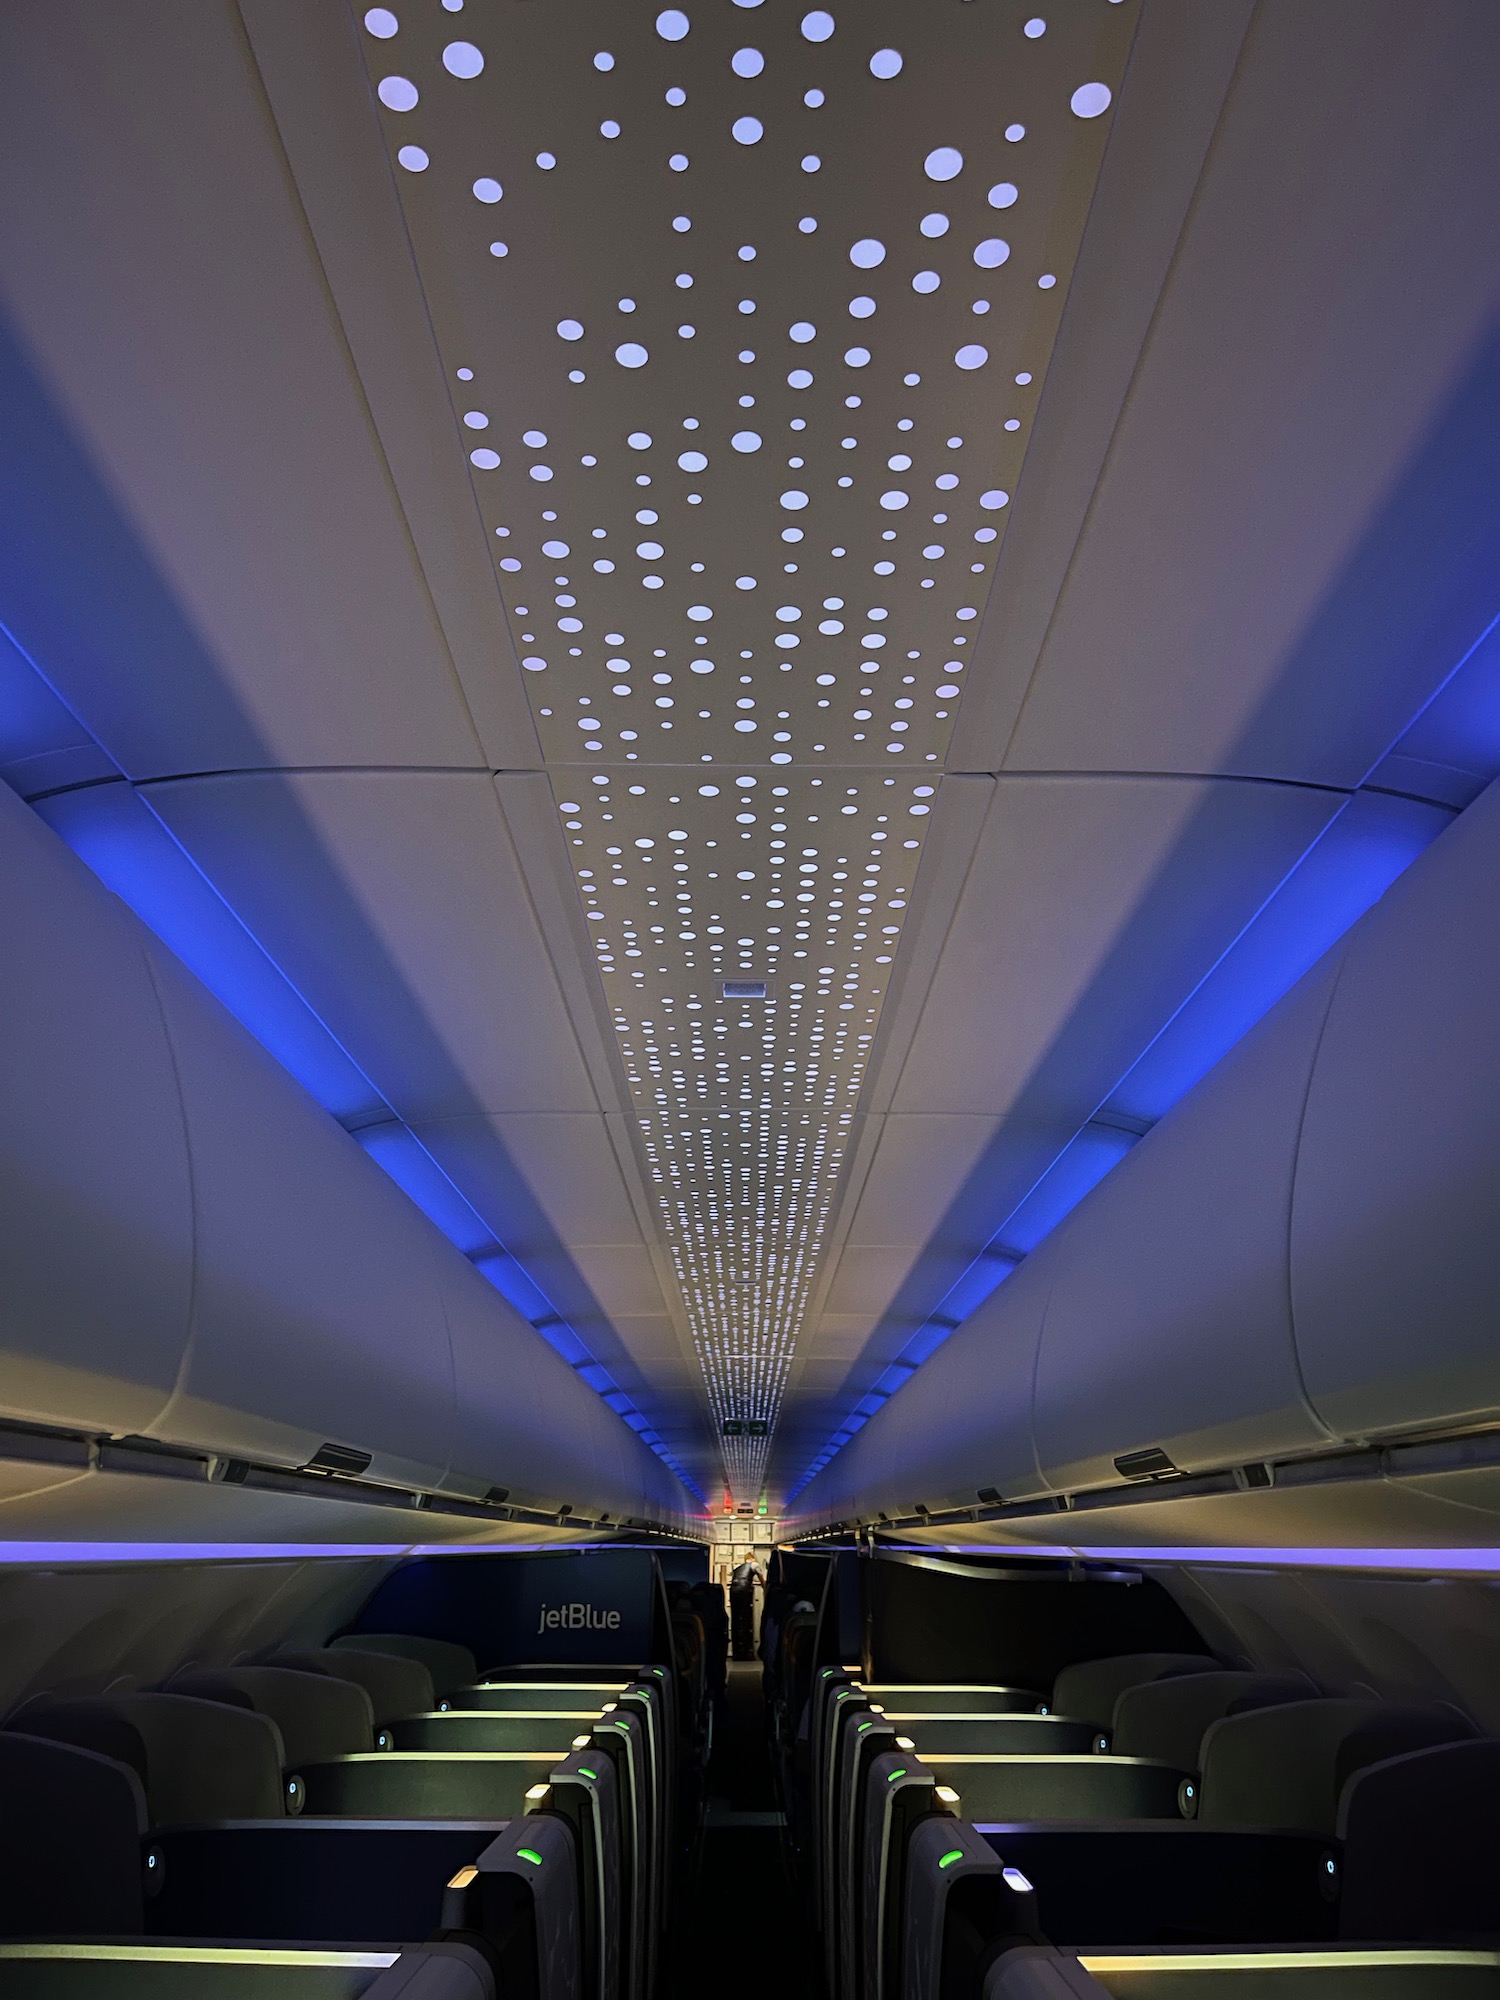 a ceiling with lights and seats in a plane with Milwaukee Art Museum in the background